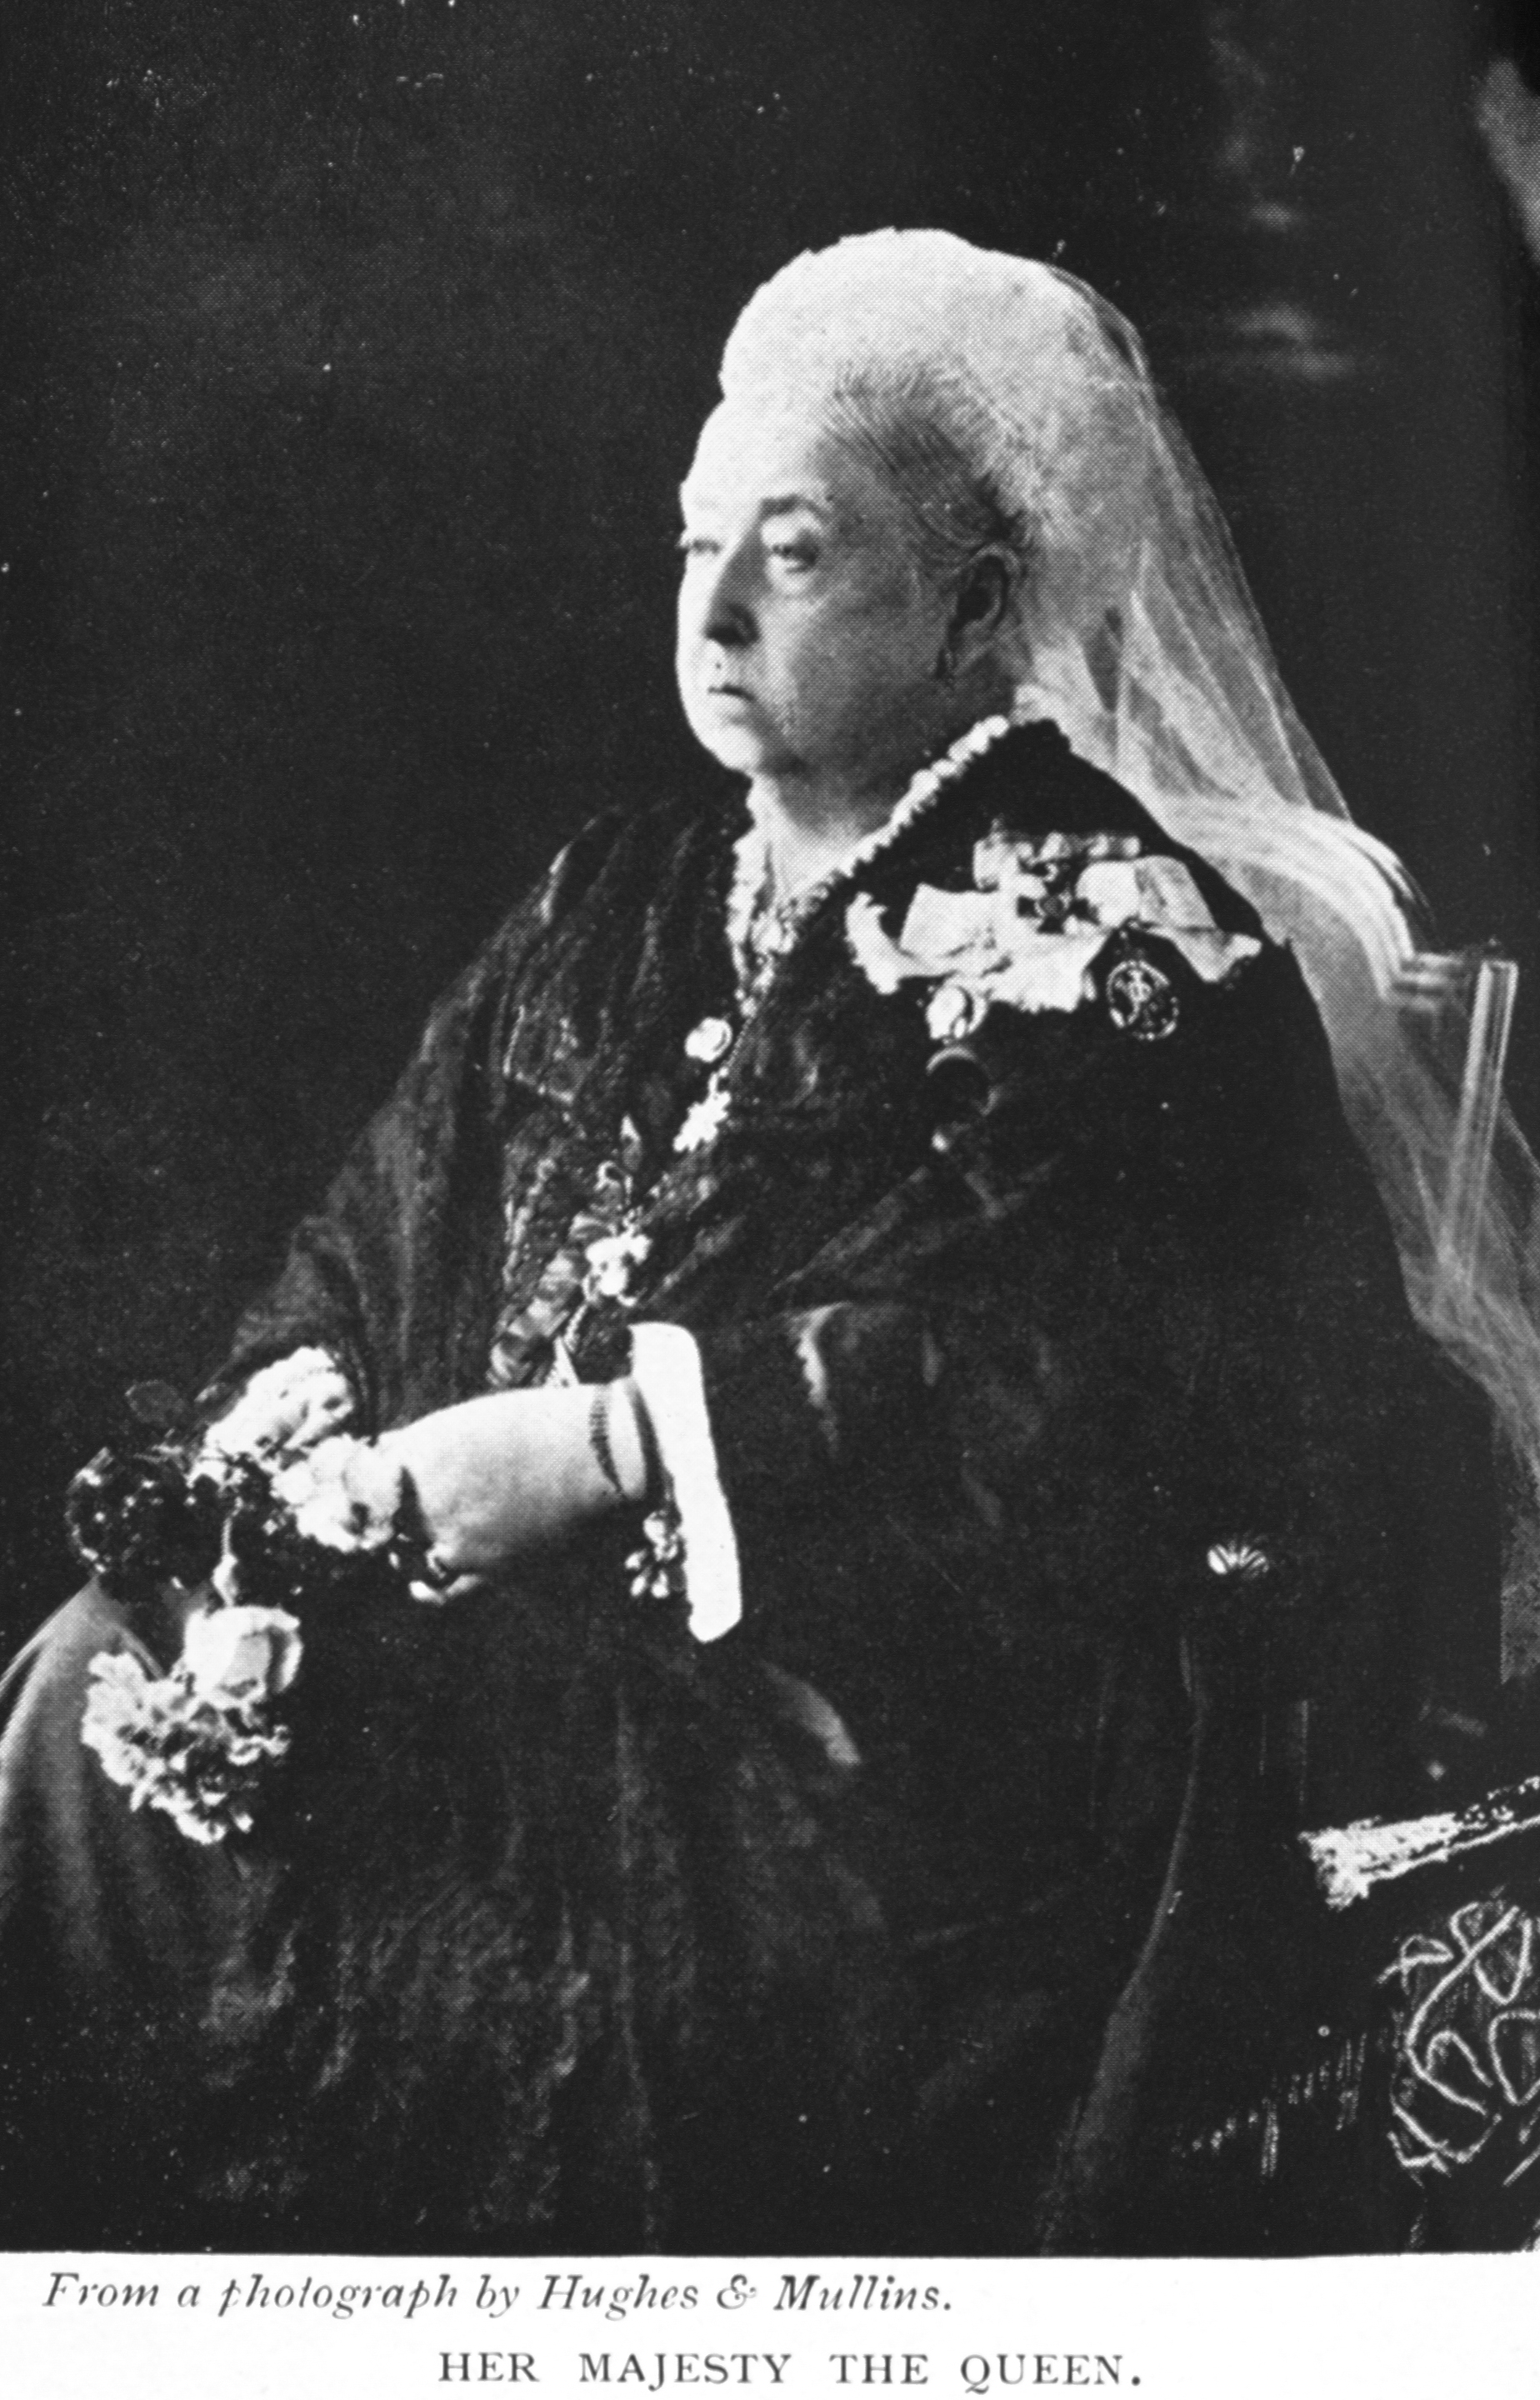 Her Majesty the Queen. From a photograph by Hughes & Mullins.
                                From Rosa Nouchette Carey, 
                                    Twelve Notable Good Women of the XIX
                                        Century.